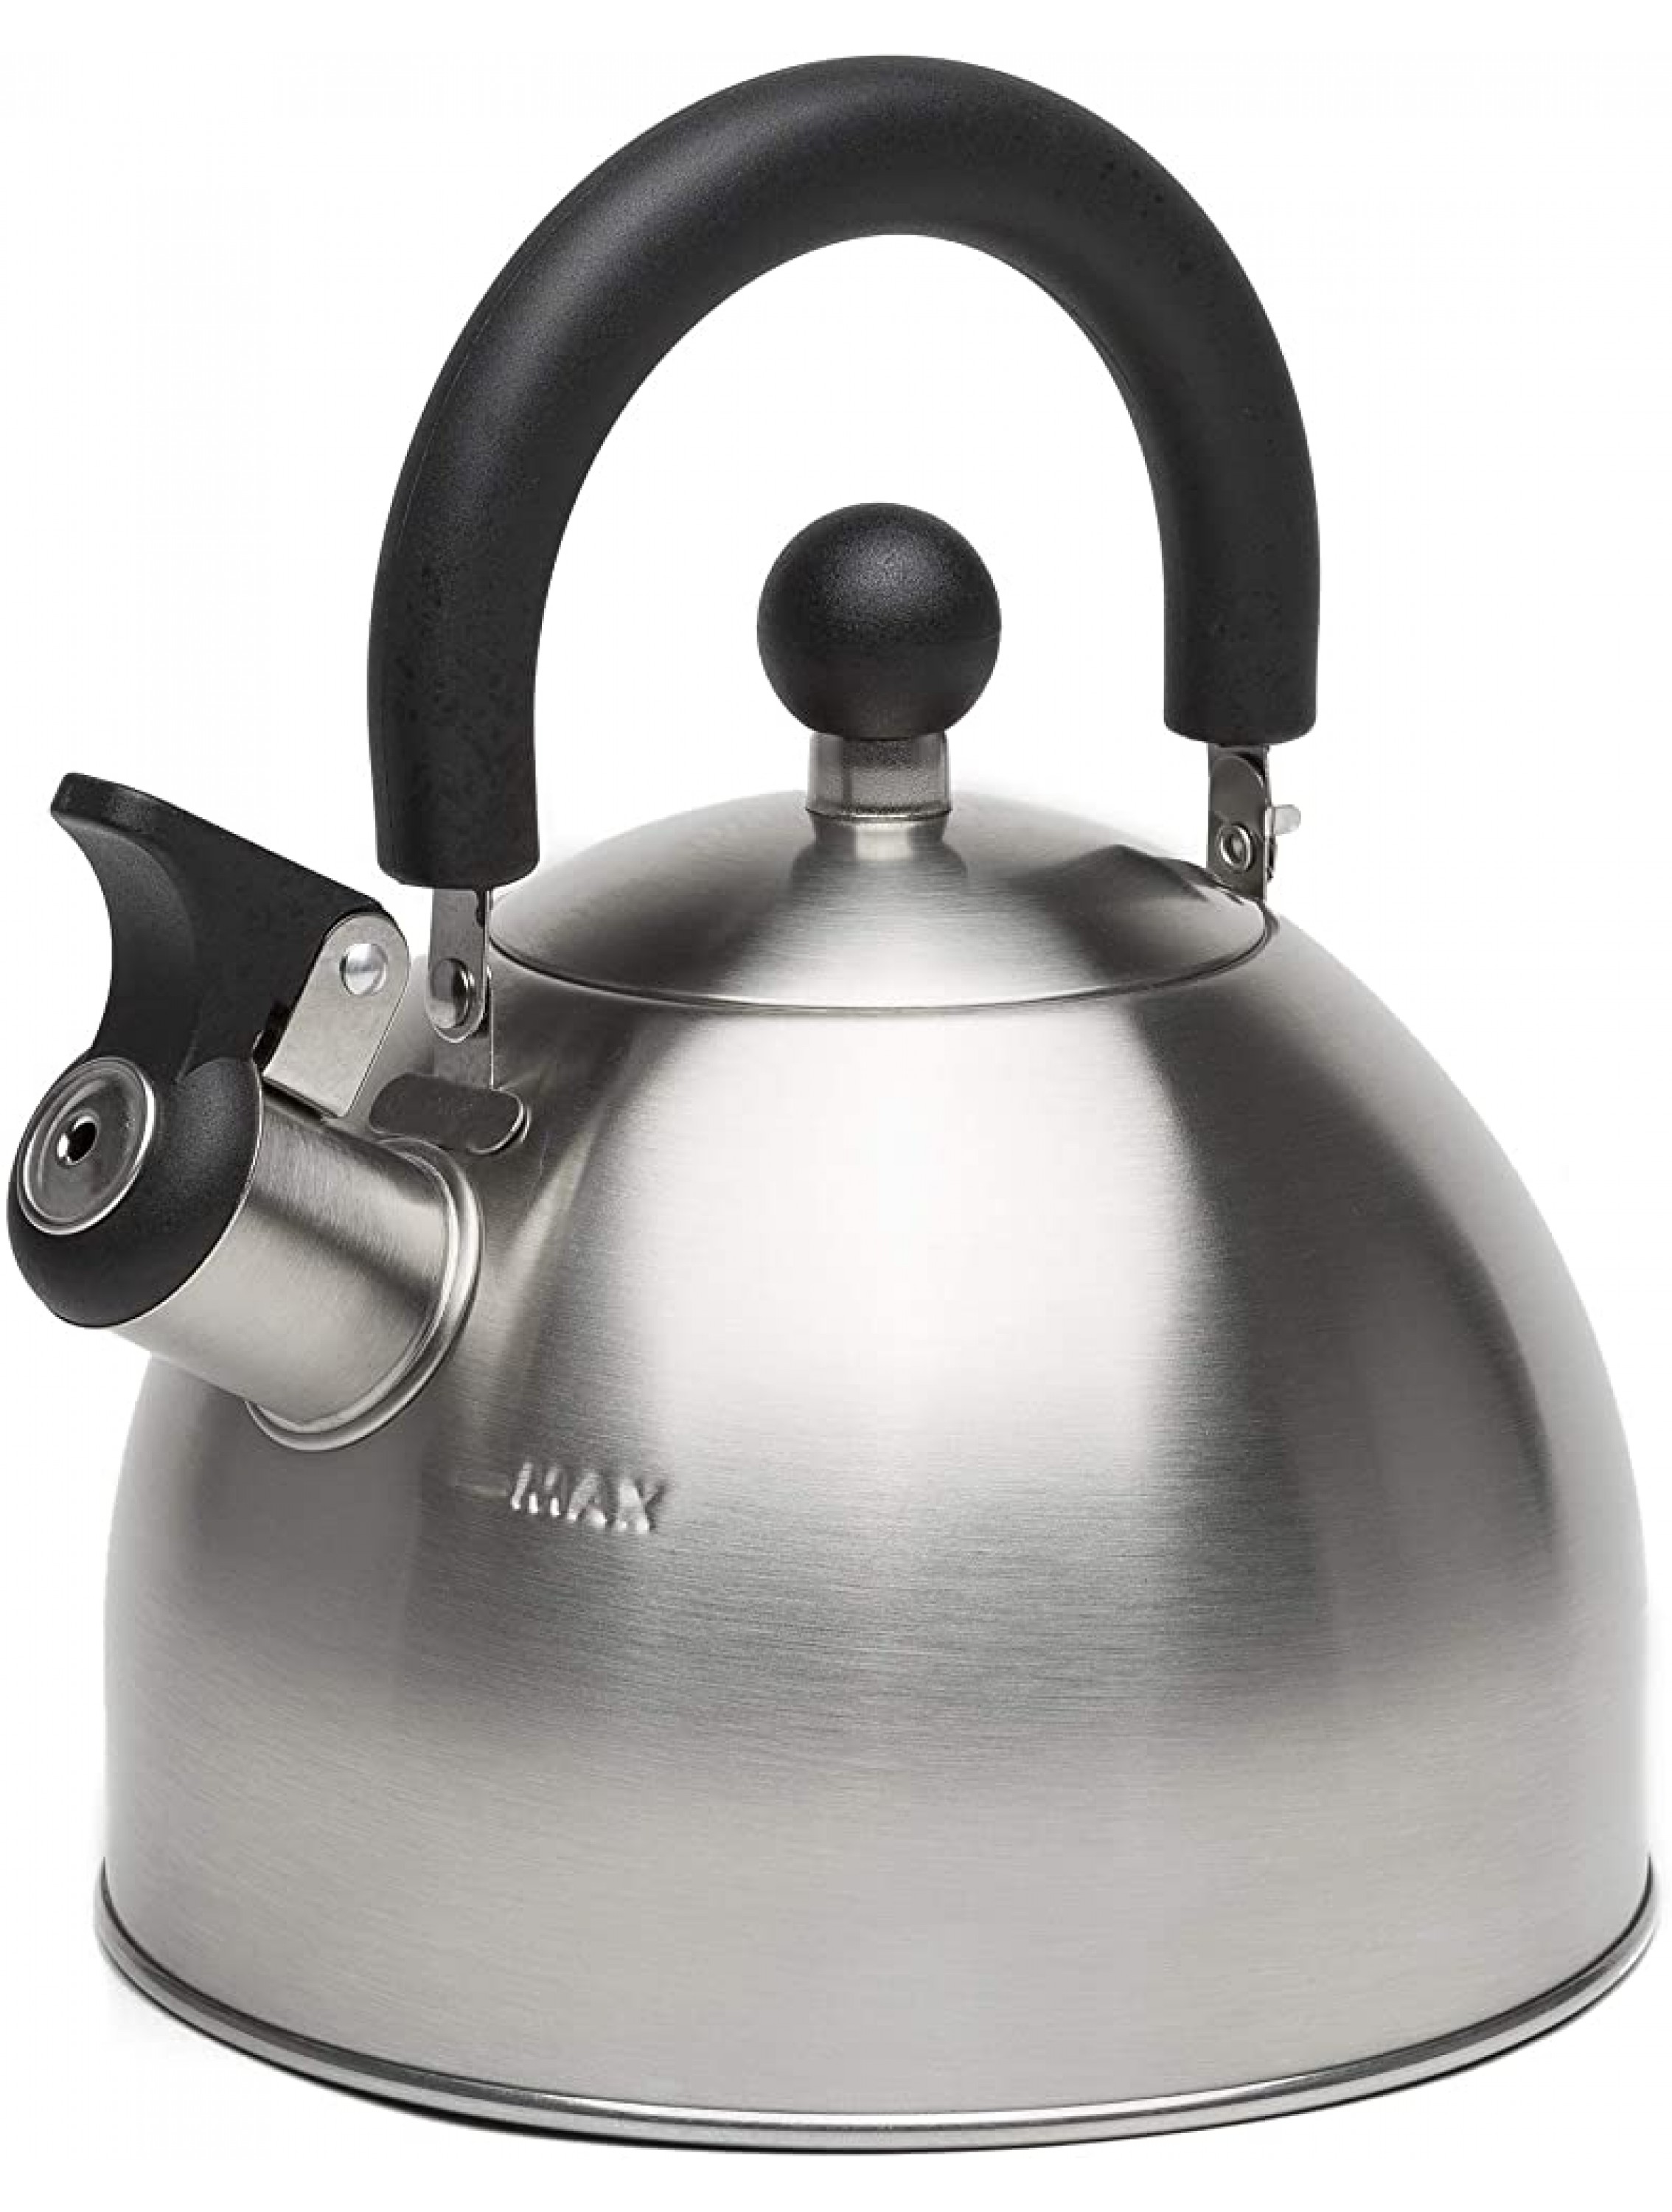 Primula Stewart Whistling Stovetop Tea Kettle Food Grade Stainless Steel Hot Water Fast to Boil Cool Touch Folding 1.5 Qt Brushed with Black Handle - BKLX6P70H